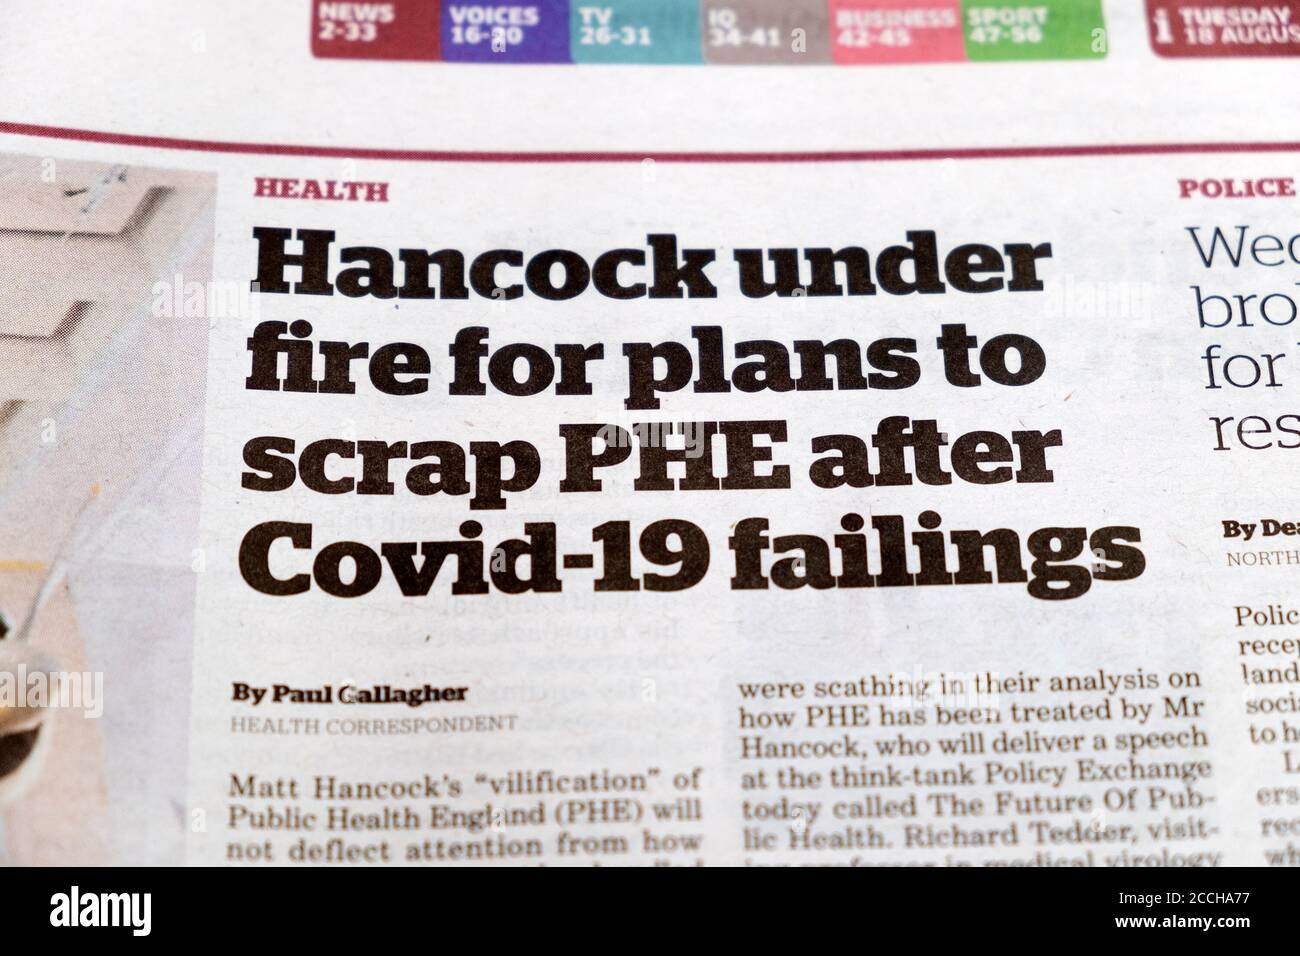 'Hancock under fire for plans to scrap PHE after Covid-19 failings' i newspaper headline inside article in August 2020 London England UK Stock Photo